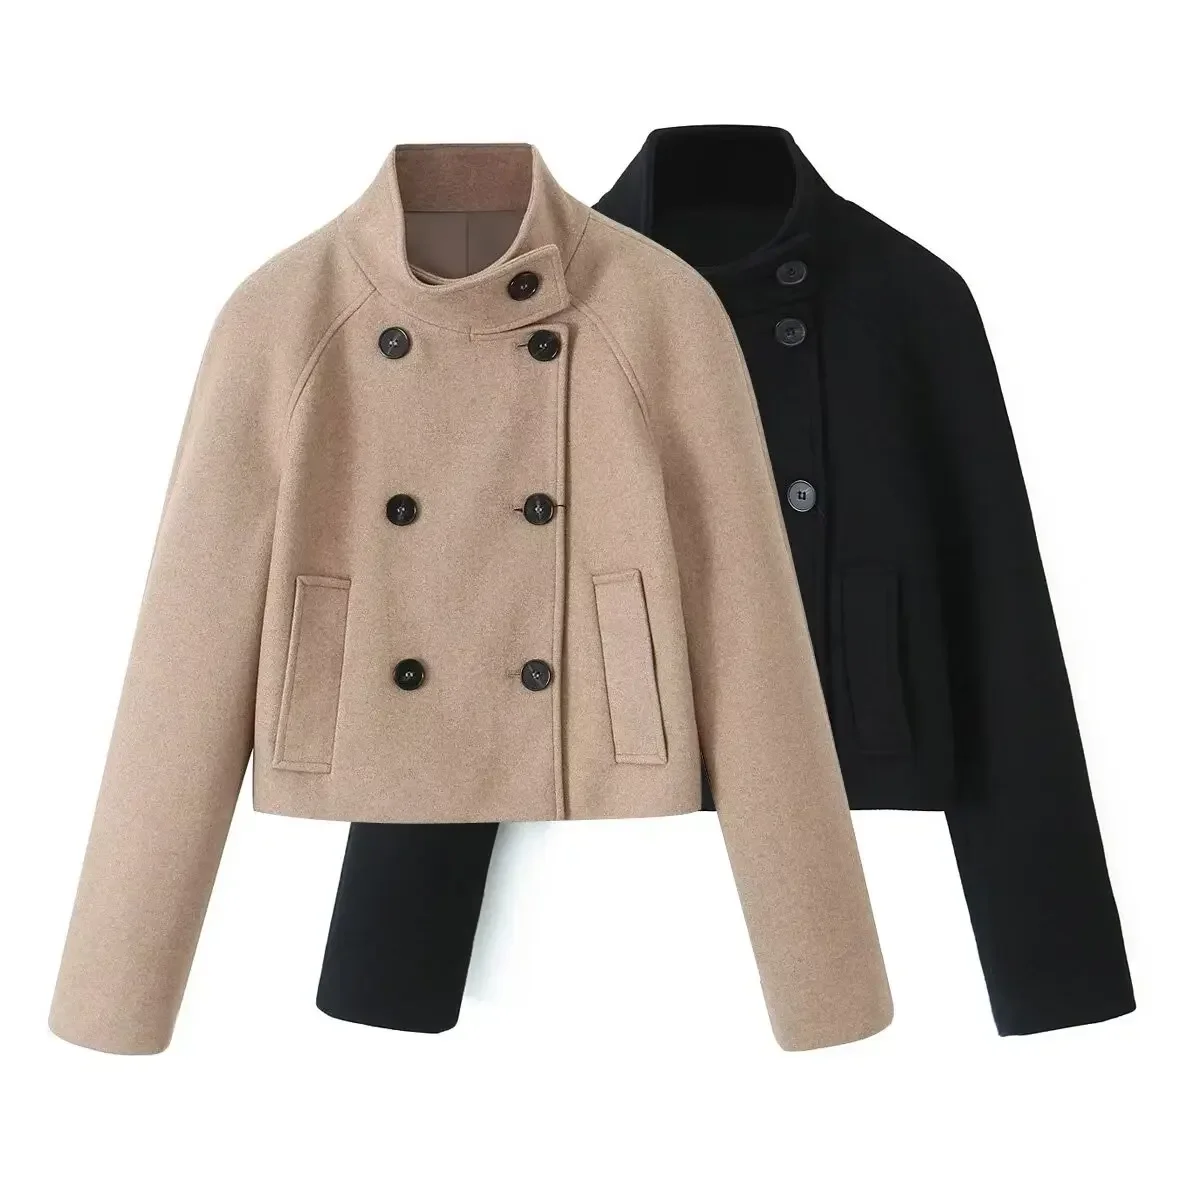 

Women New Fashion stand collar Cropped Double Breasted Woolen Coat Vintage Long Sleeve Pockets Female Outerwear Chic Overshirt